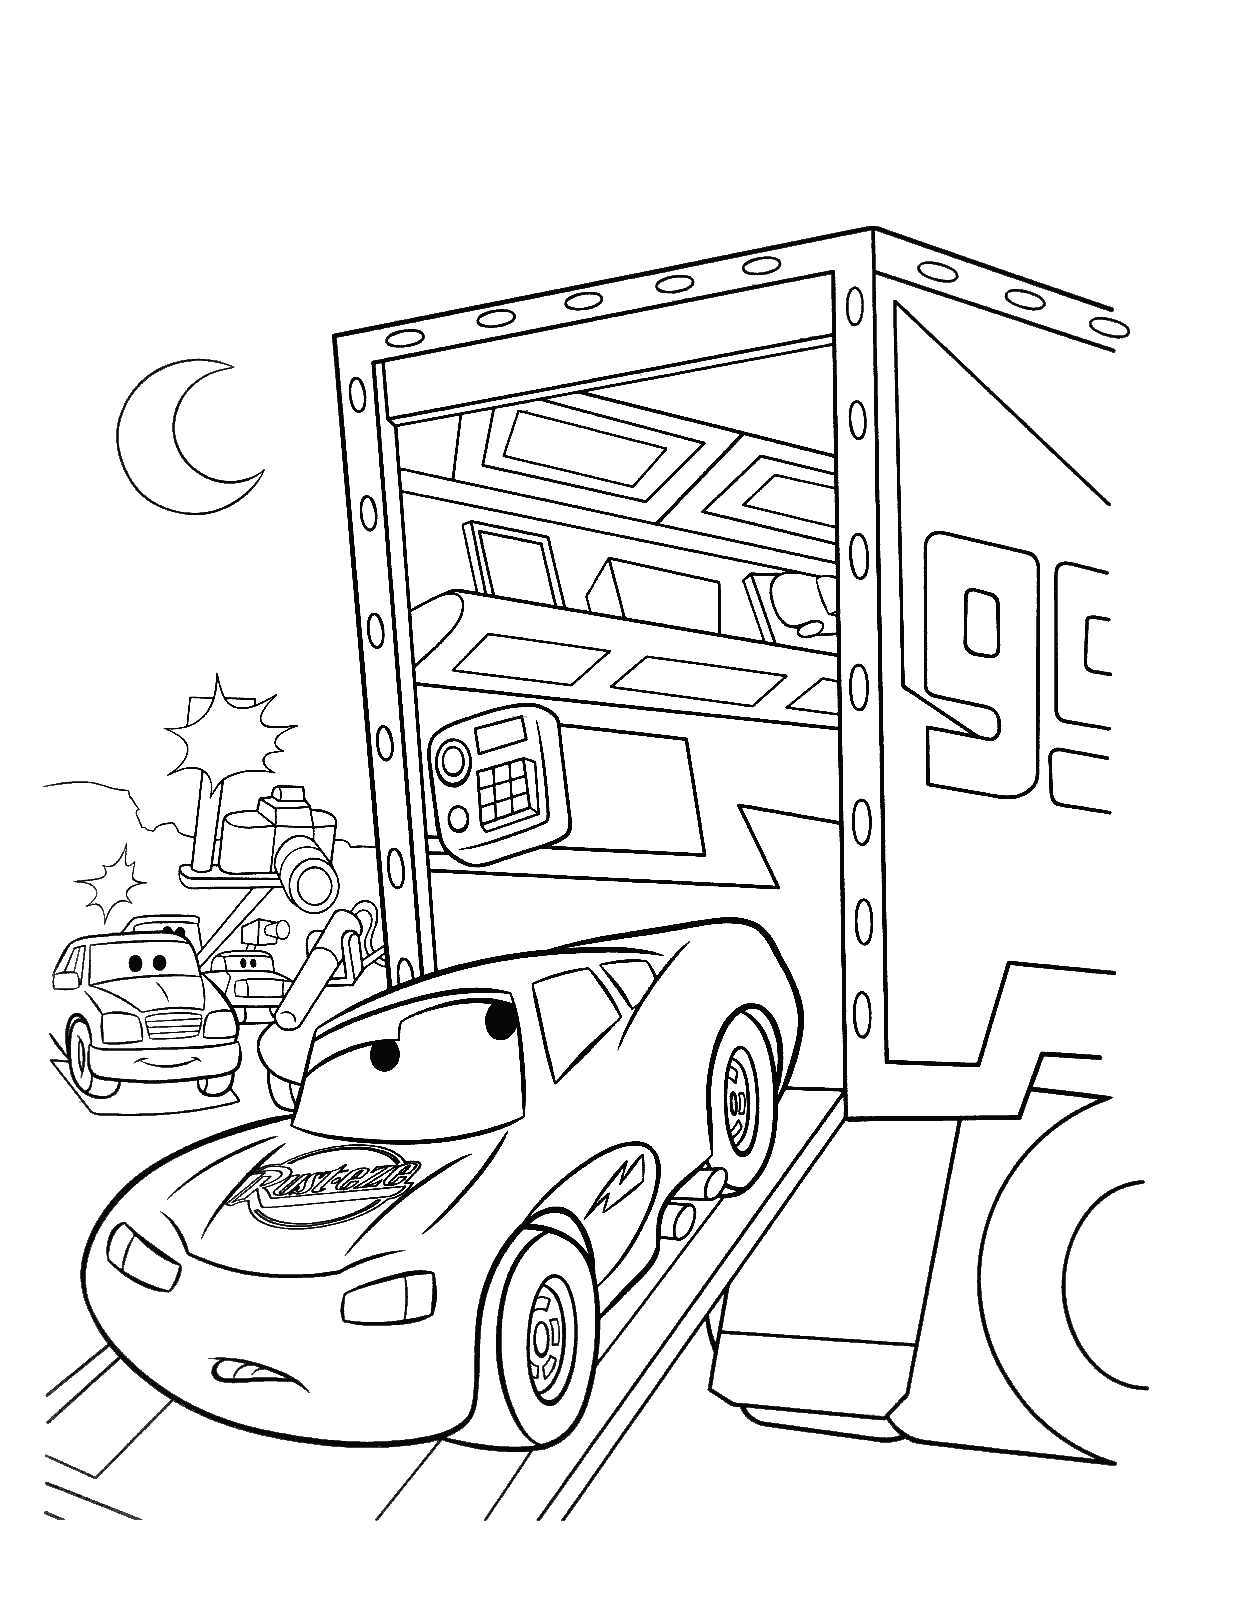 Cars coloring pages to download - Cars Kids Coloring Pages